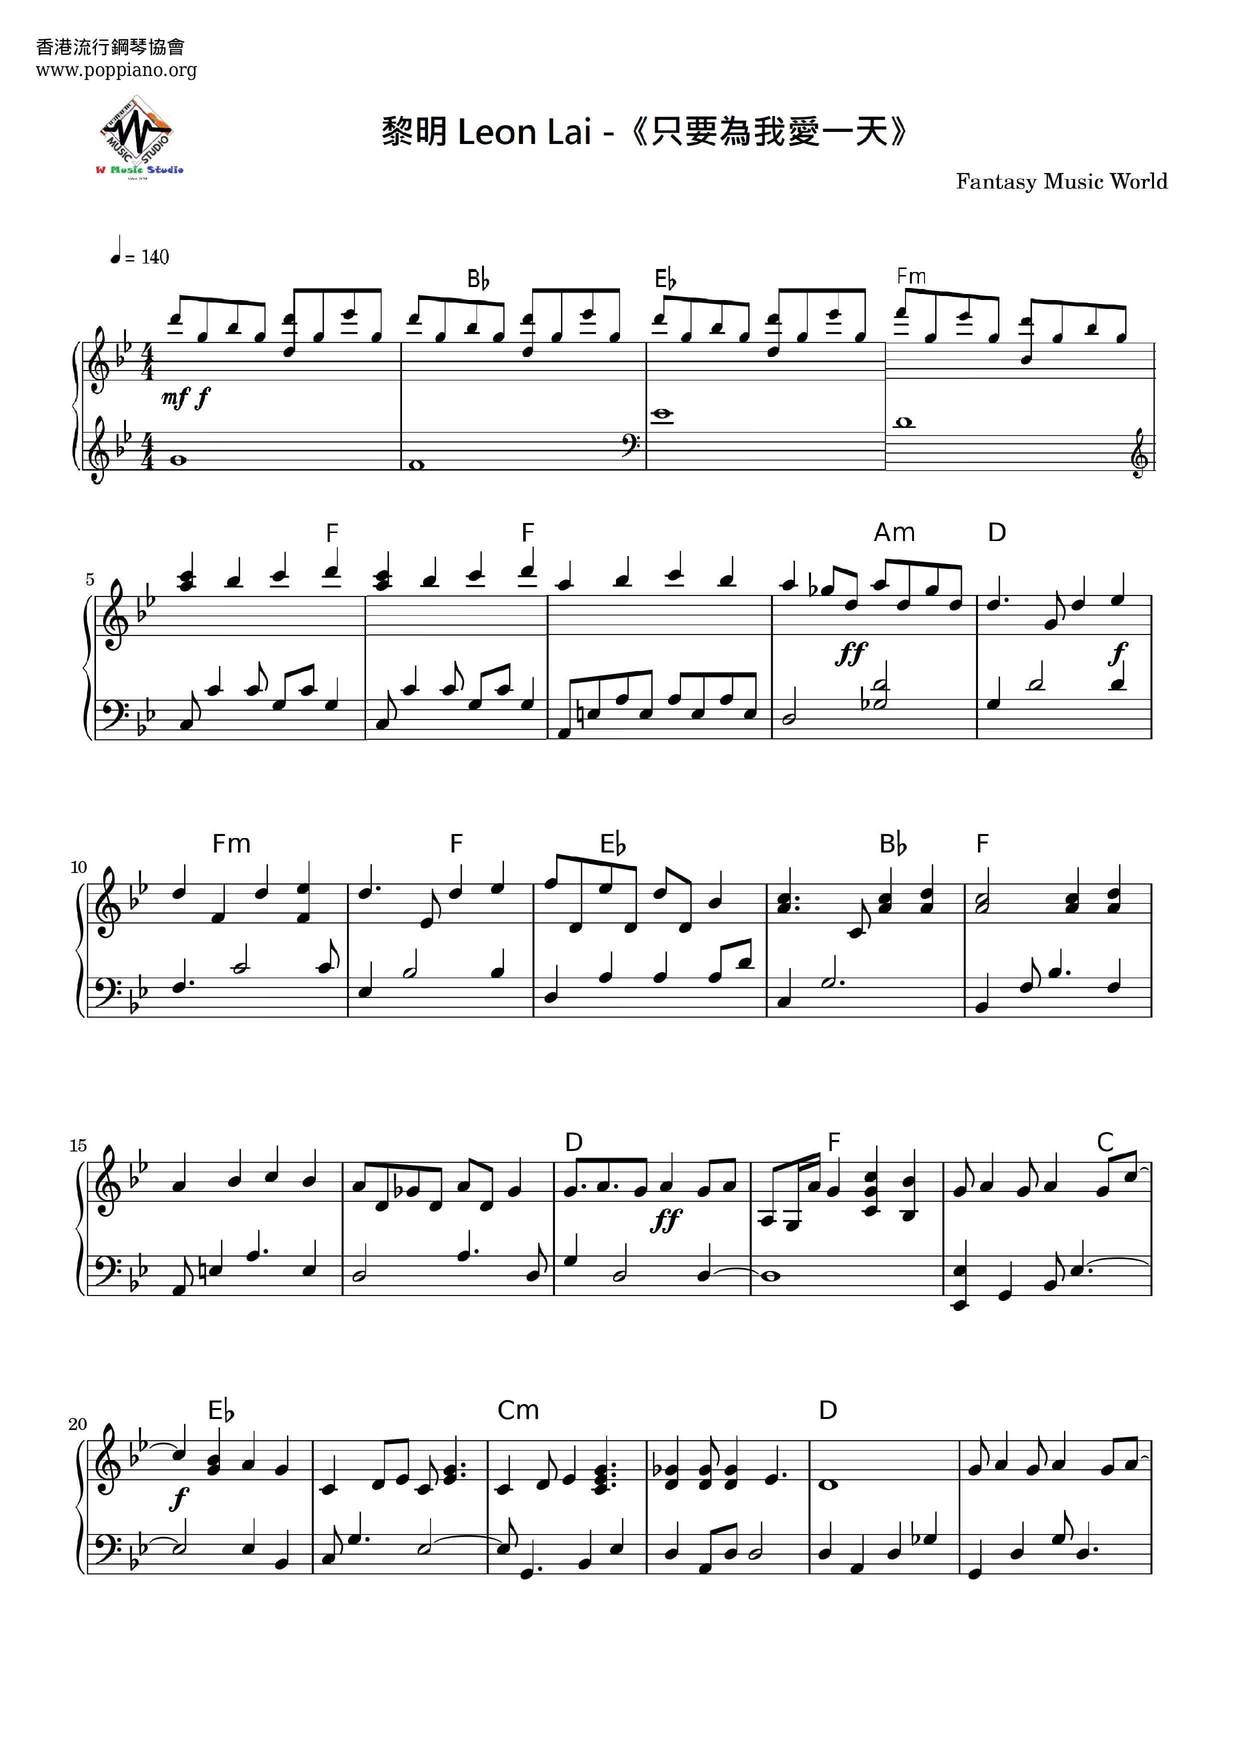 leon-lai-just-love-the-day-for-me-sheet-music-pdf-free-score-download